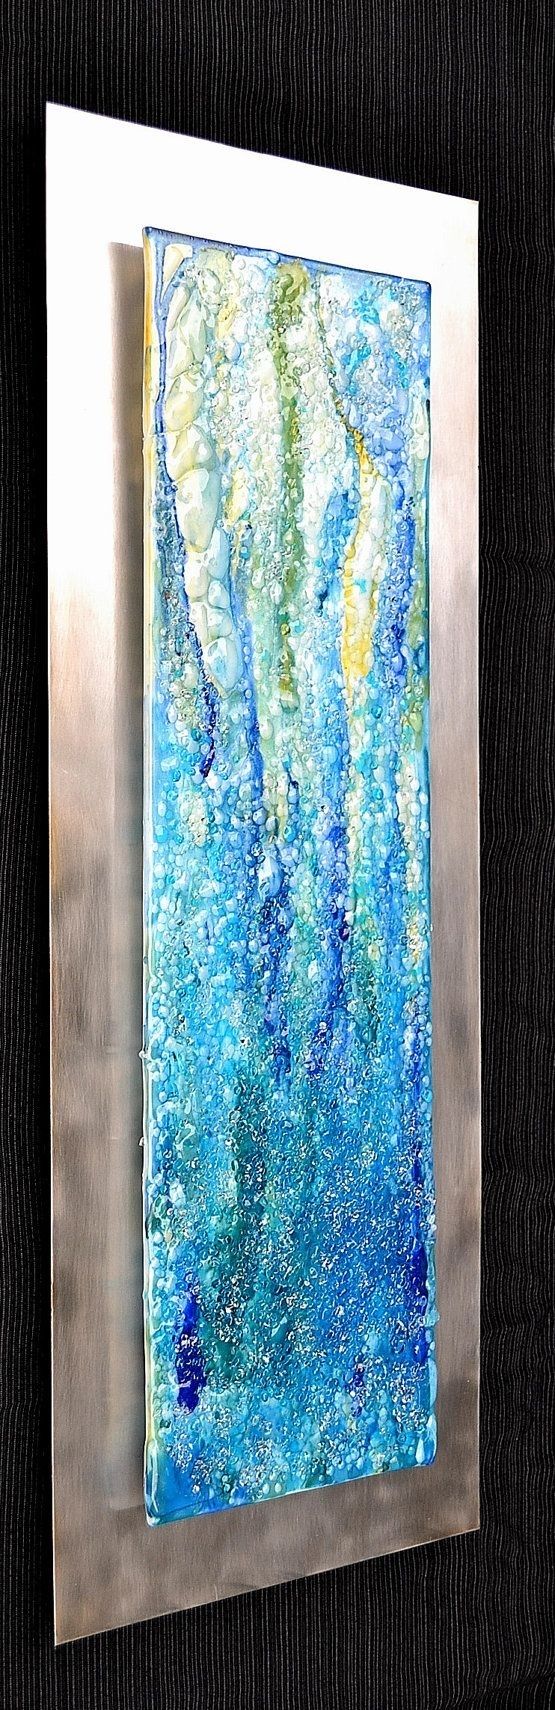 Waterfall – Modern Fused Glass Wall Hanging Art On Stainless Steel Inside Glass Wall Art (View 5 of 20)